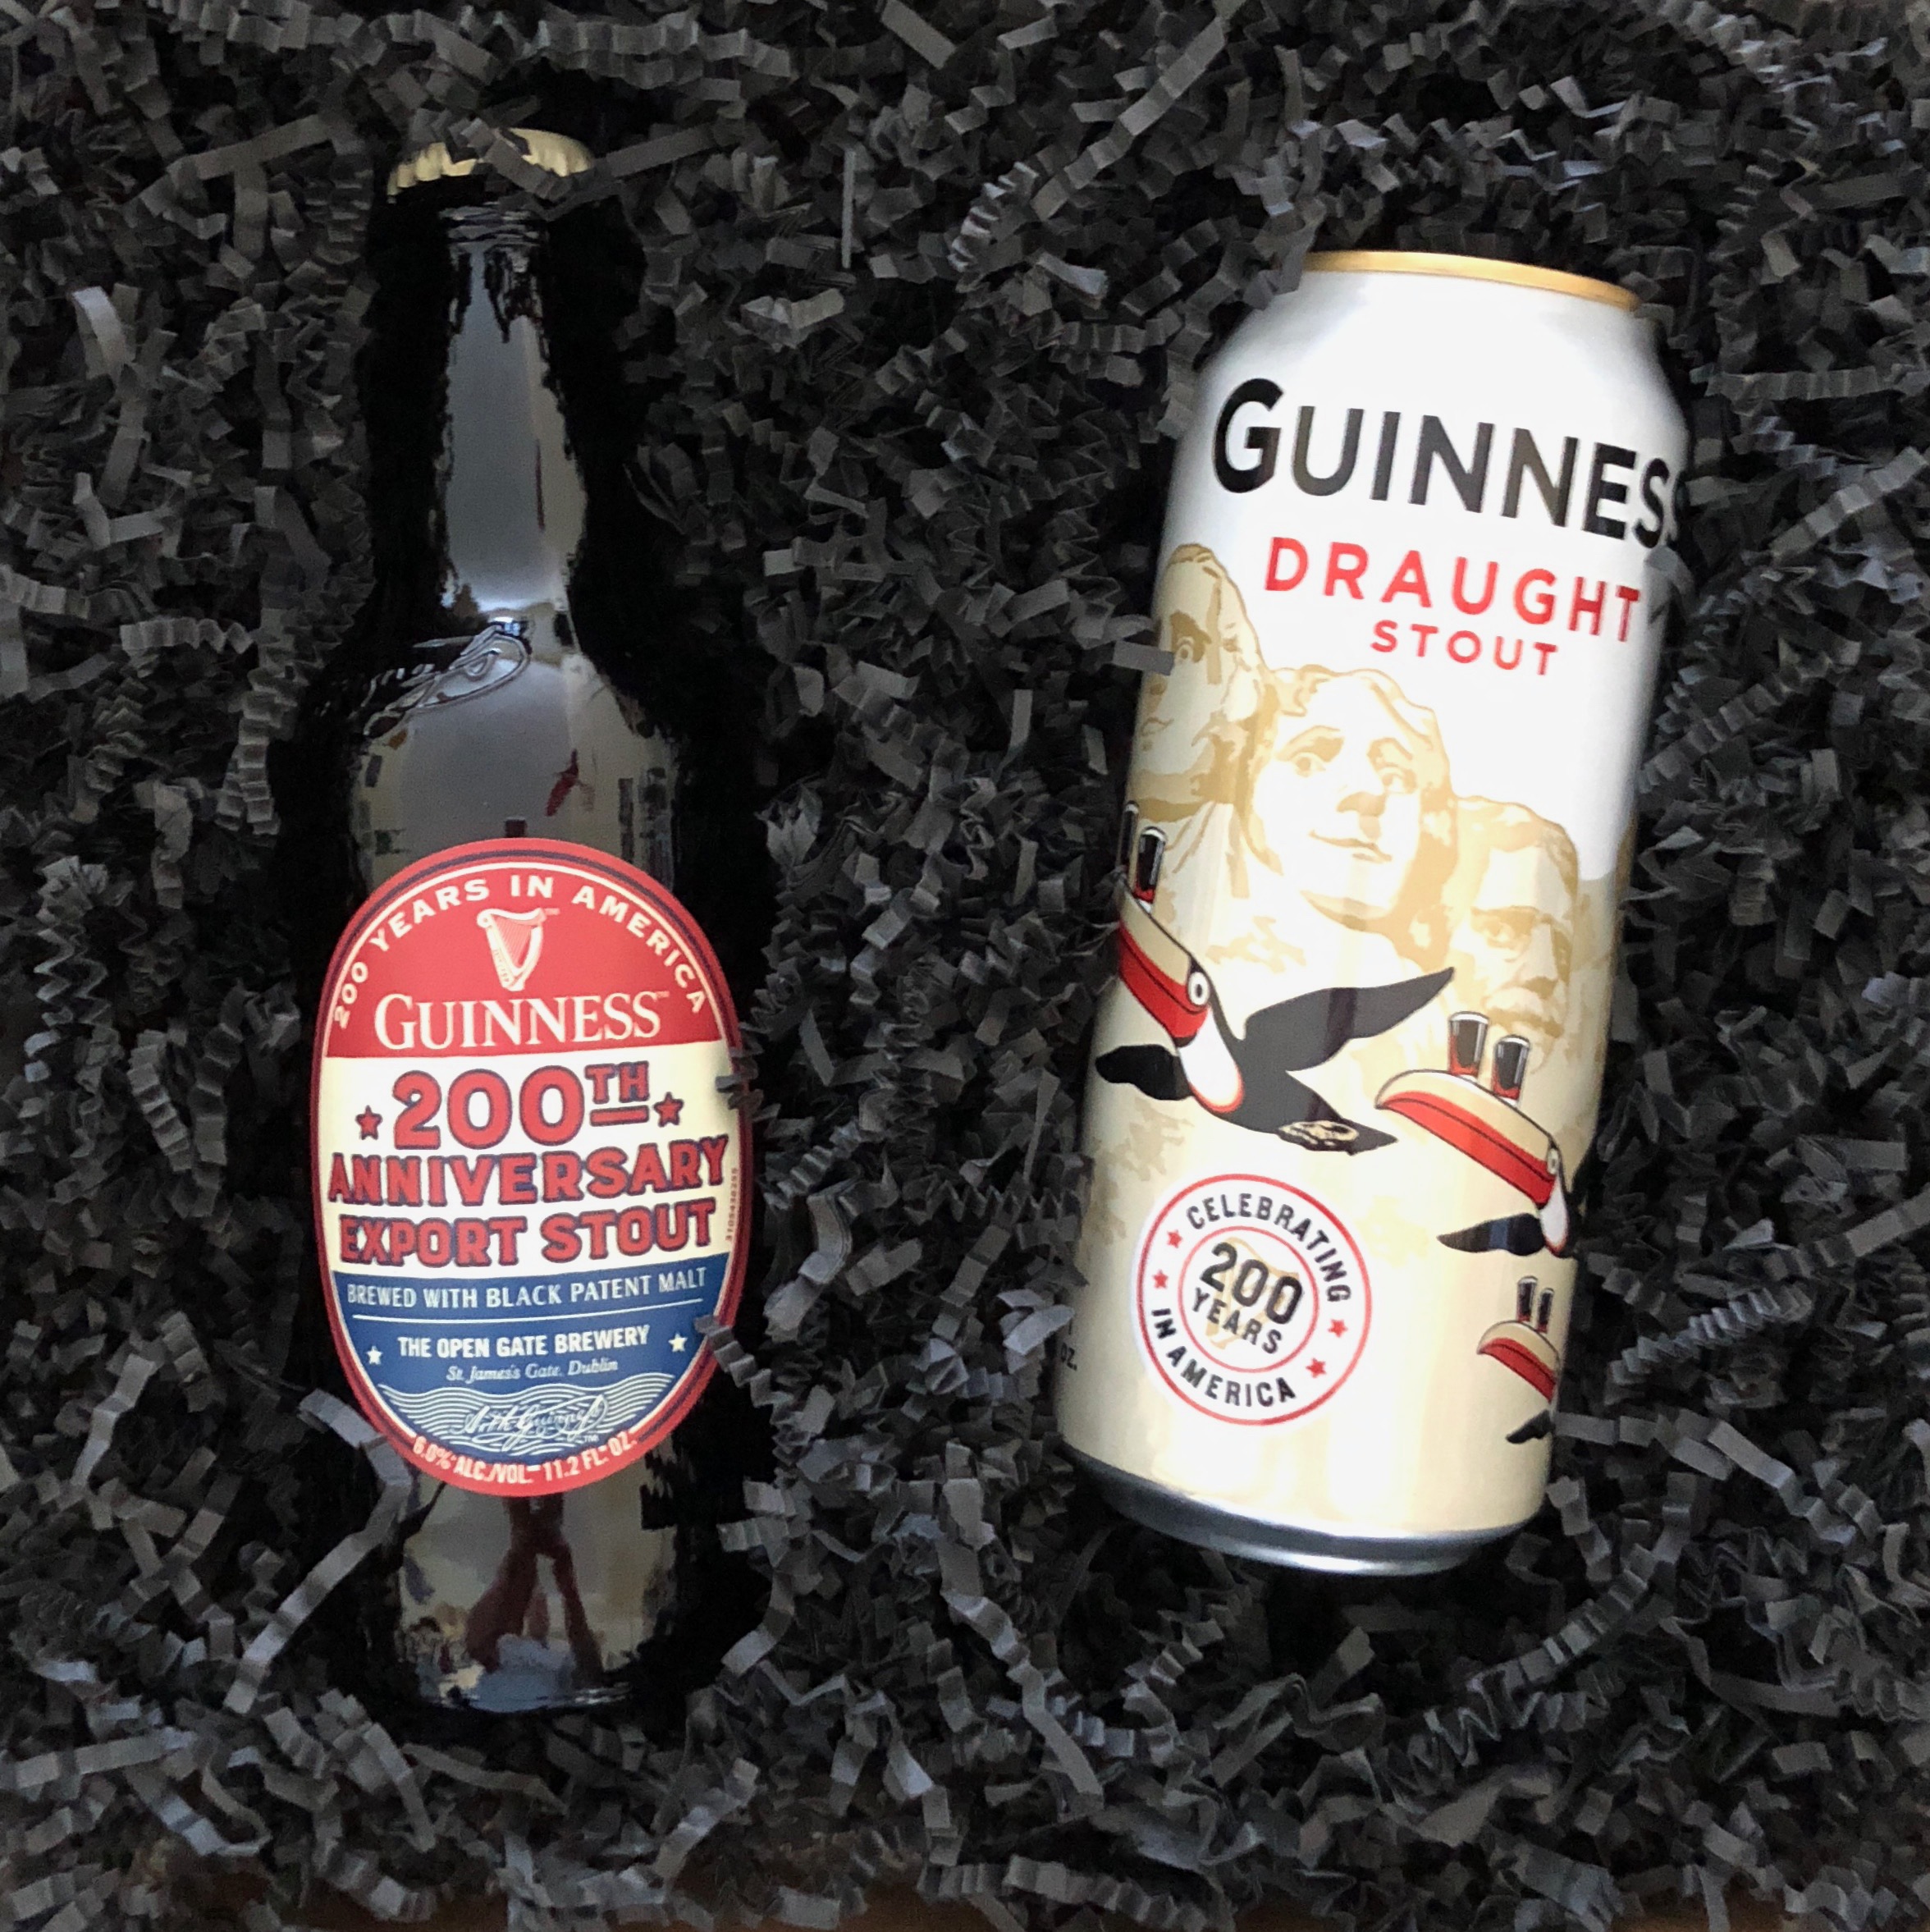 Guinness celebrated 200 years of exporting its beers to the United States. We enjoyed this 200th Anniversary Export Stout.